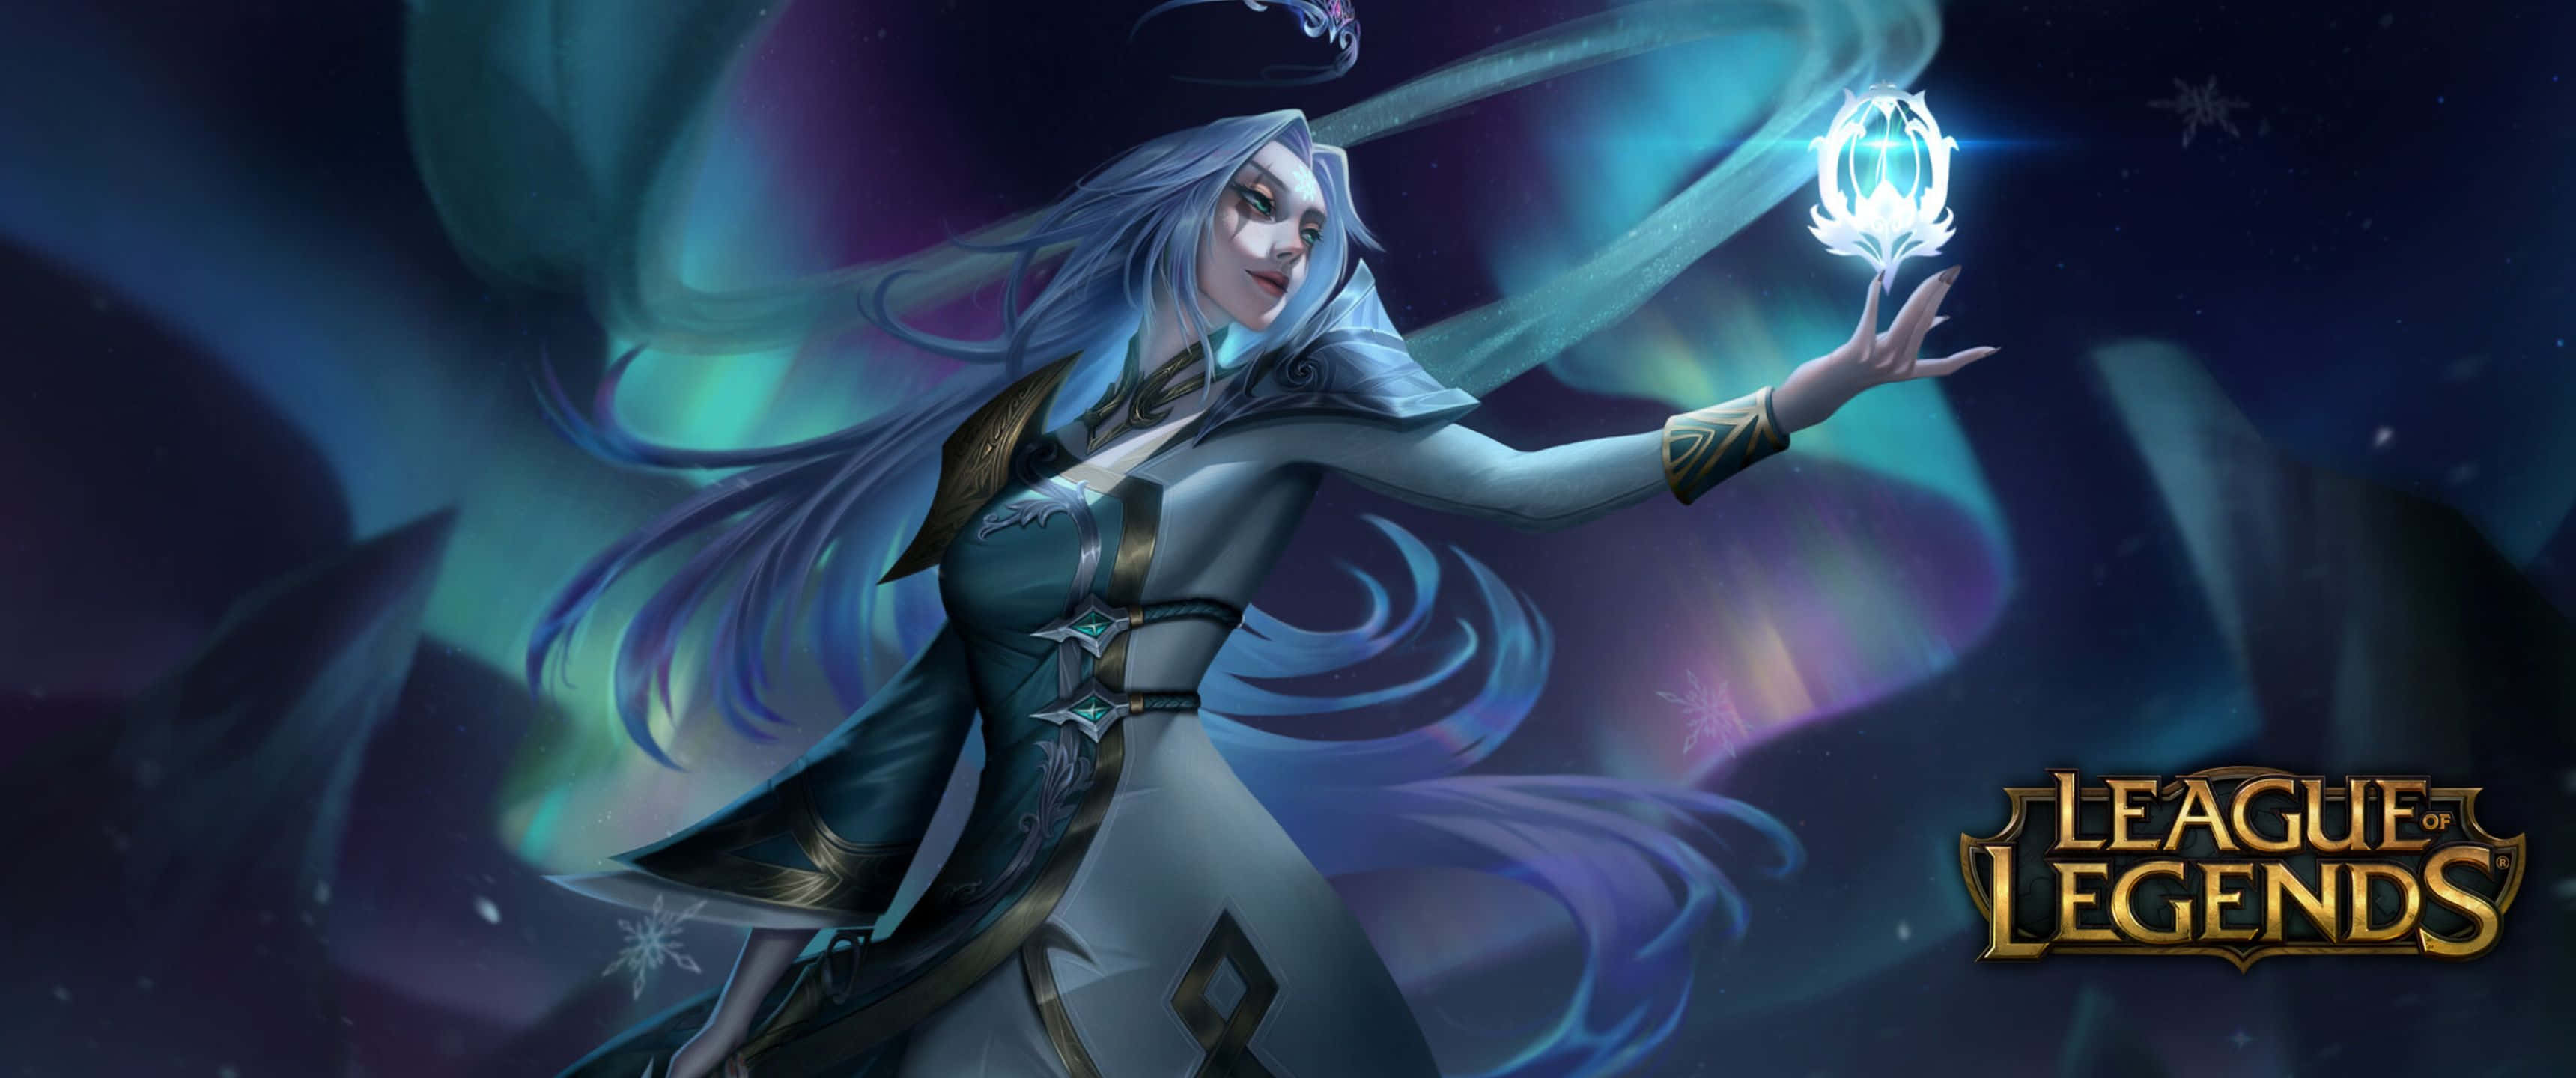 Winterblessed Diana 3440x1440p League Of Legends Background